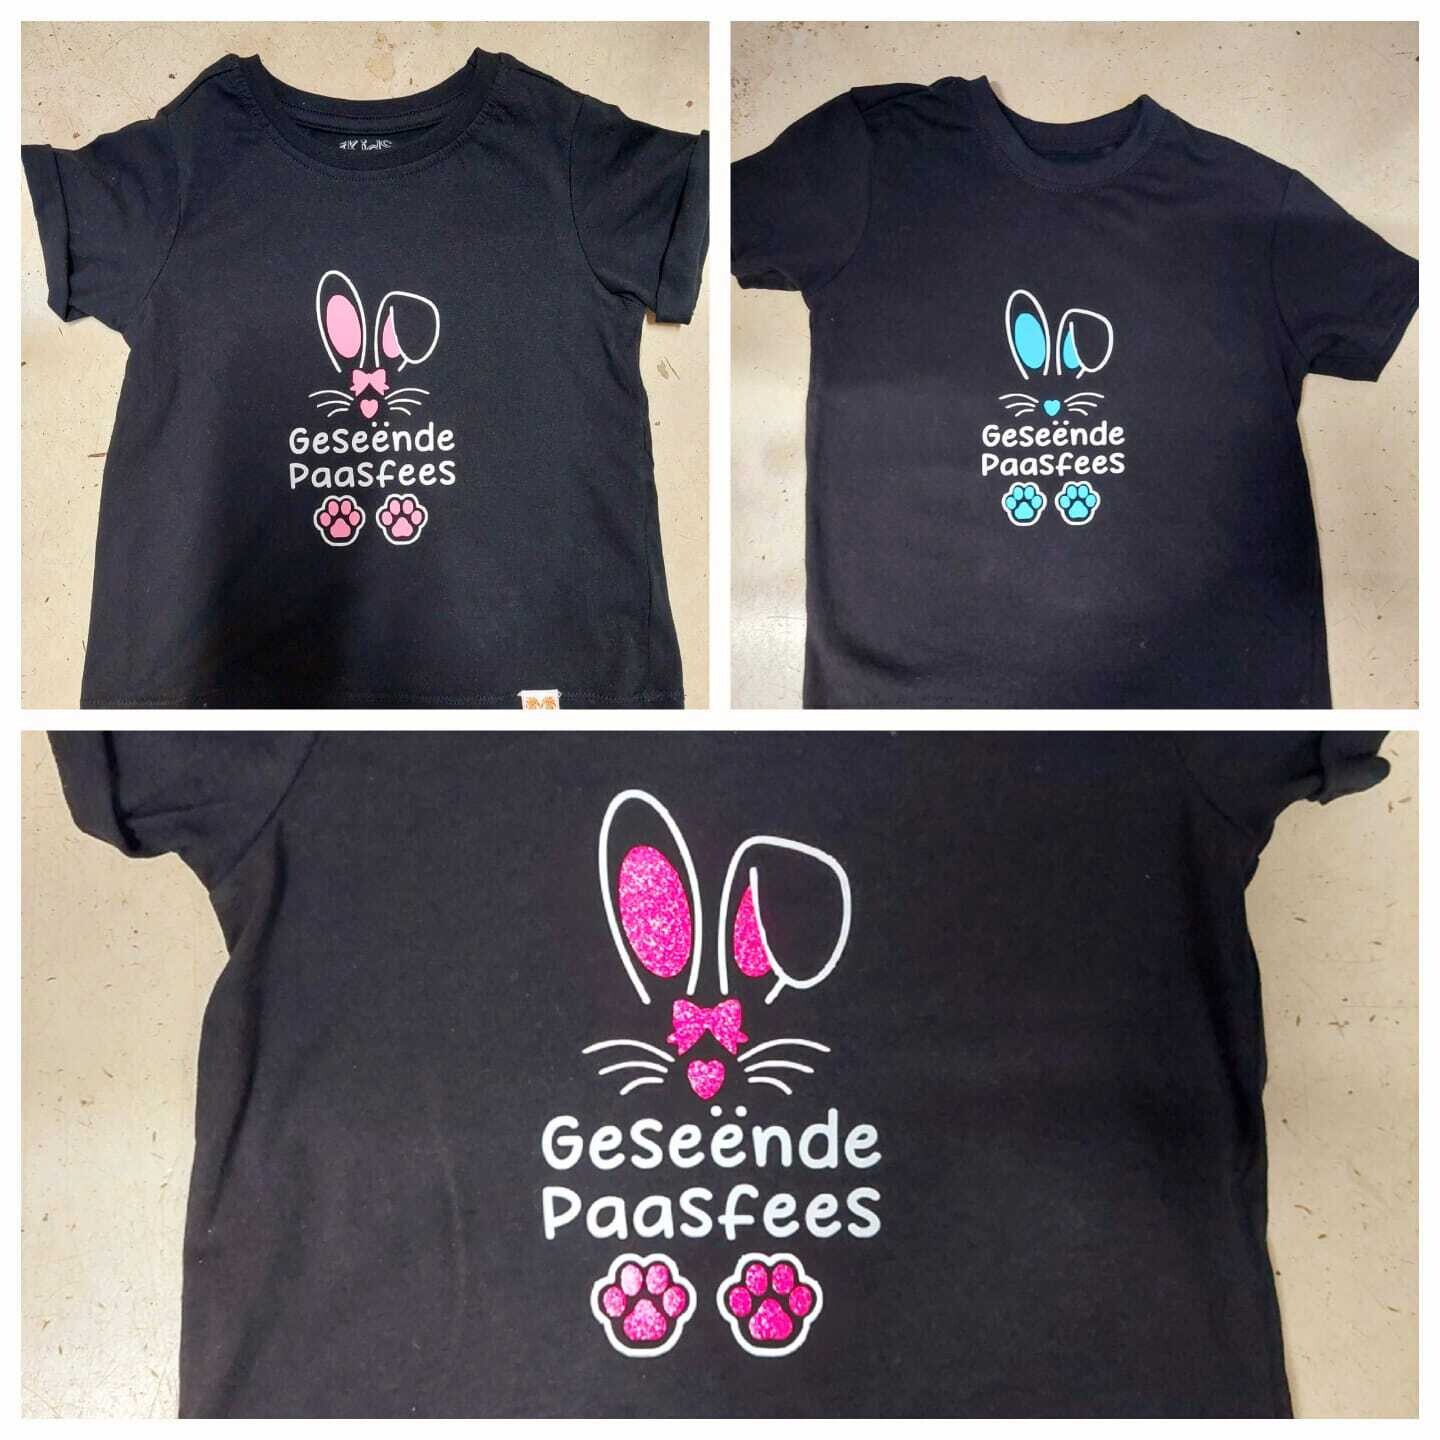 Easter shirts and babygrows
starting from